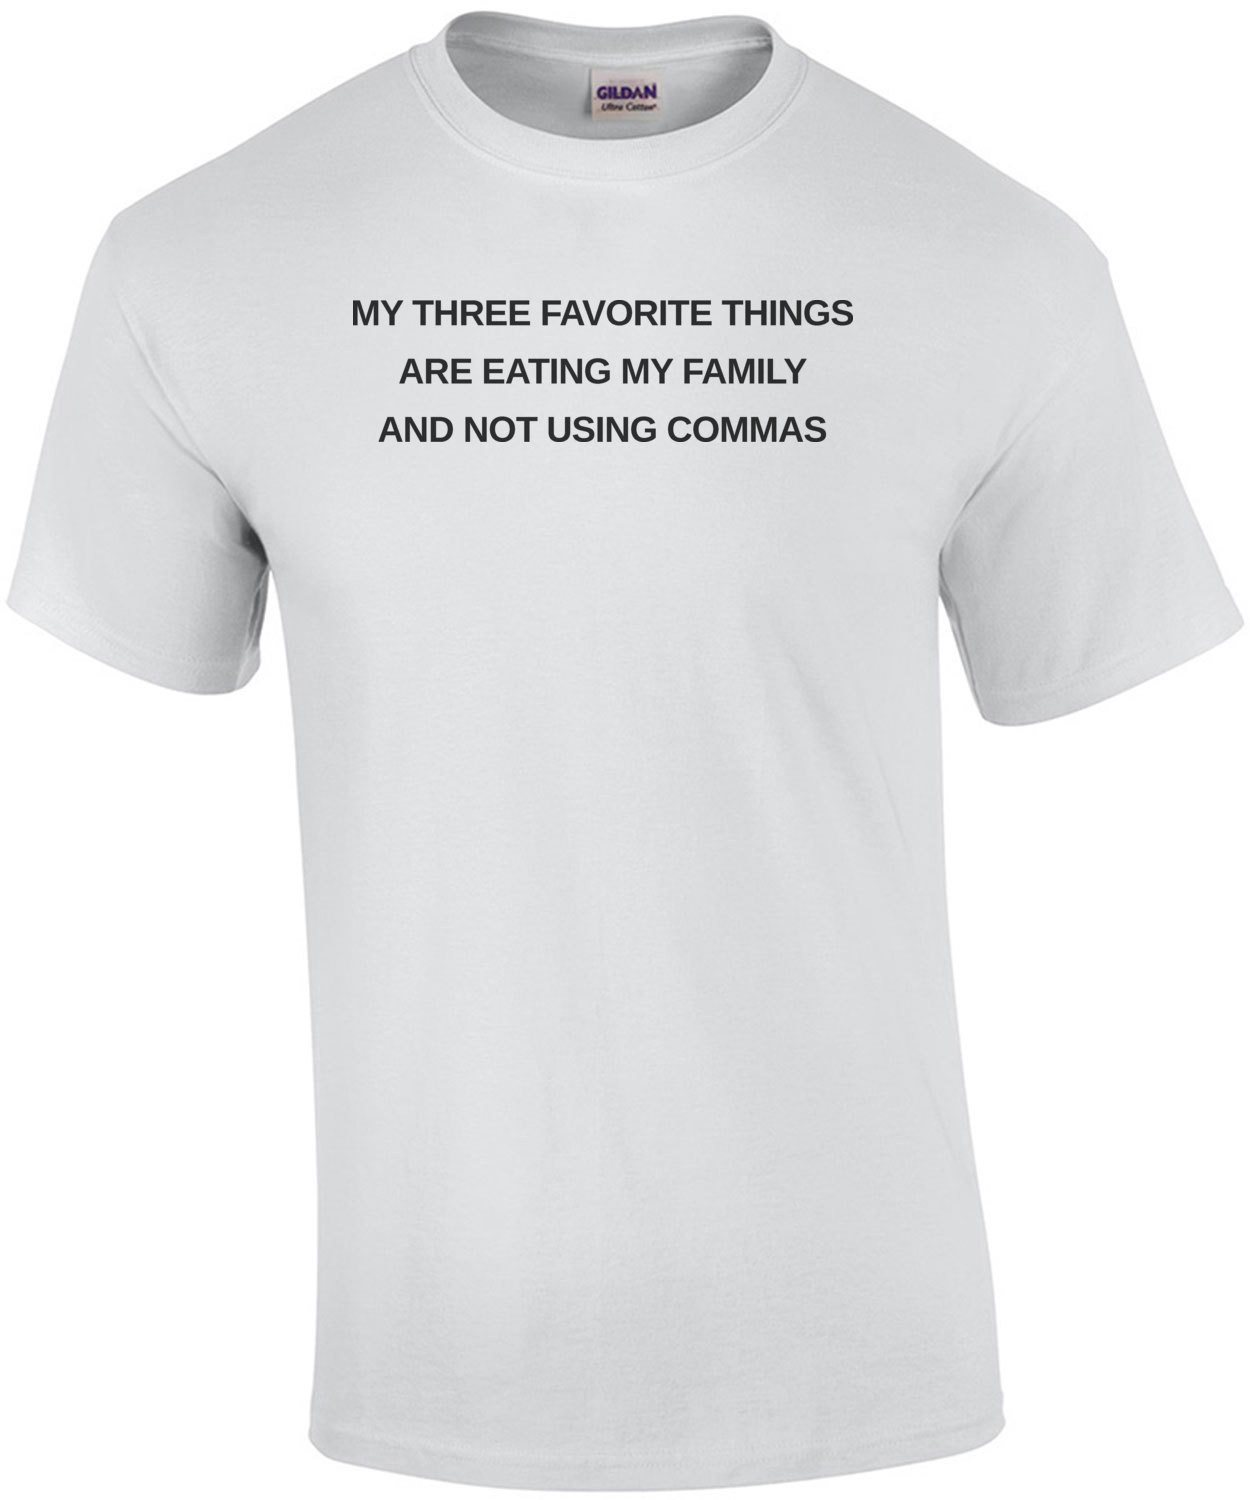 My three favorite things are eating my family and not using commas - funny grammar t-shirt